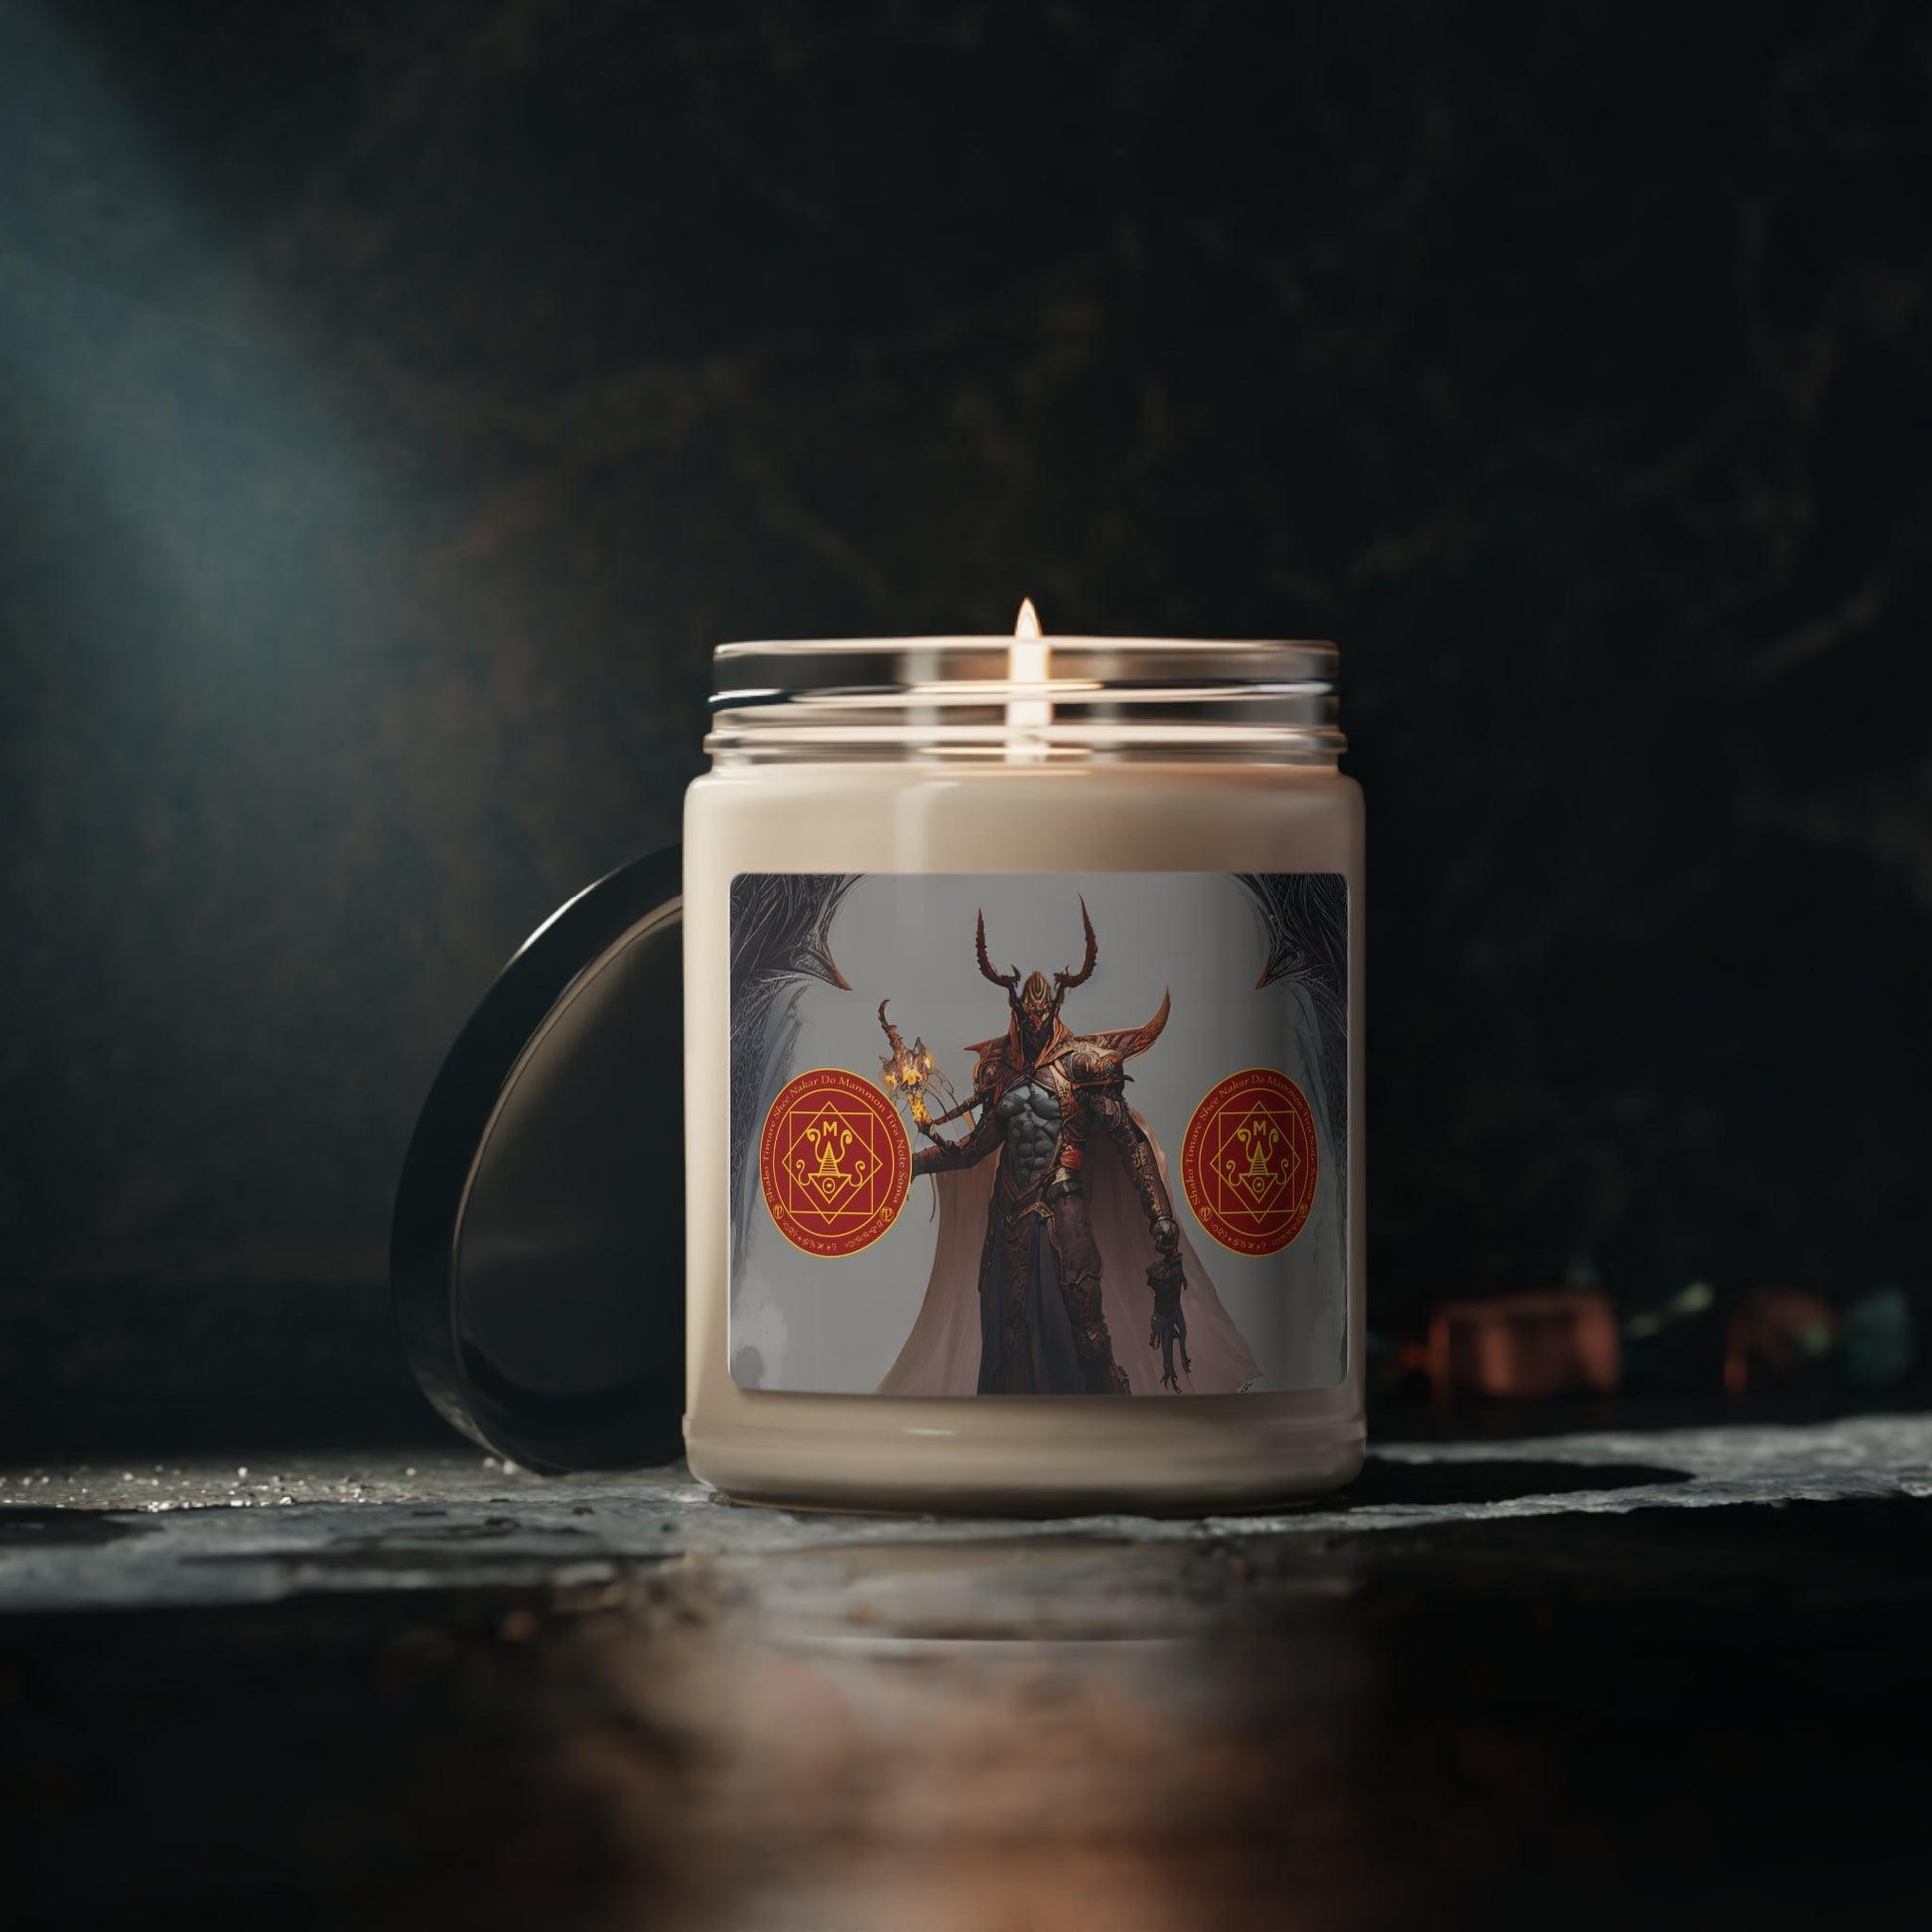 Demon-Mammon-Altar-Scented-Soy-Candle-for-Money-related-offerings-rituals-initiations-or-praying-and-meditation-25